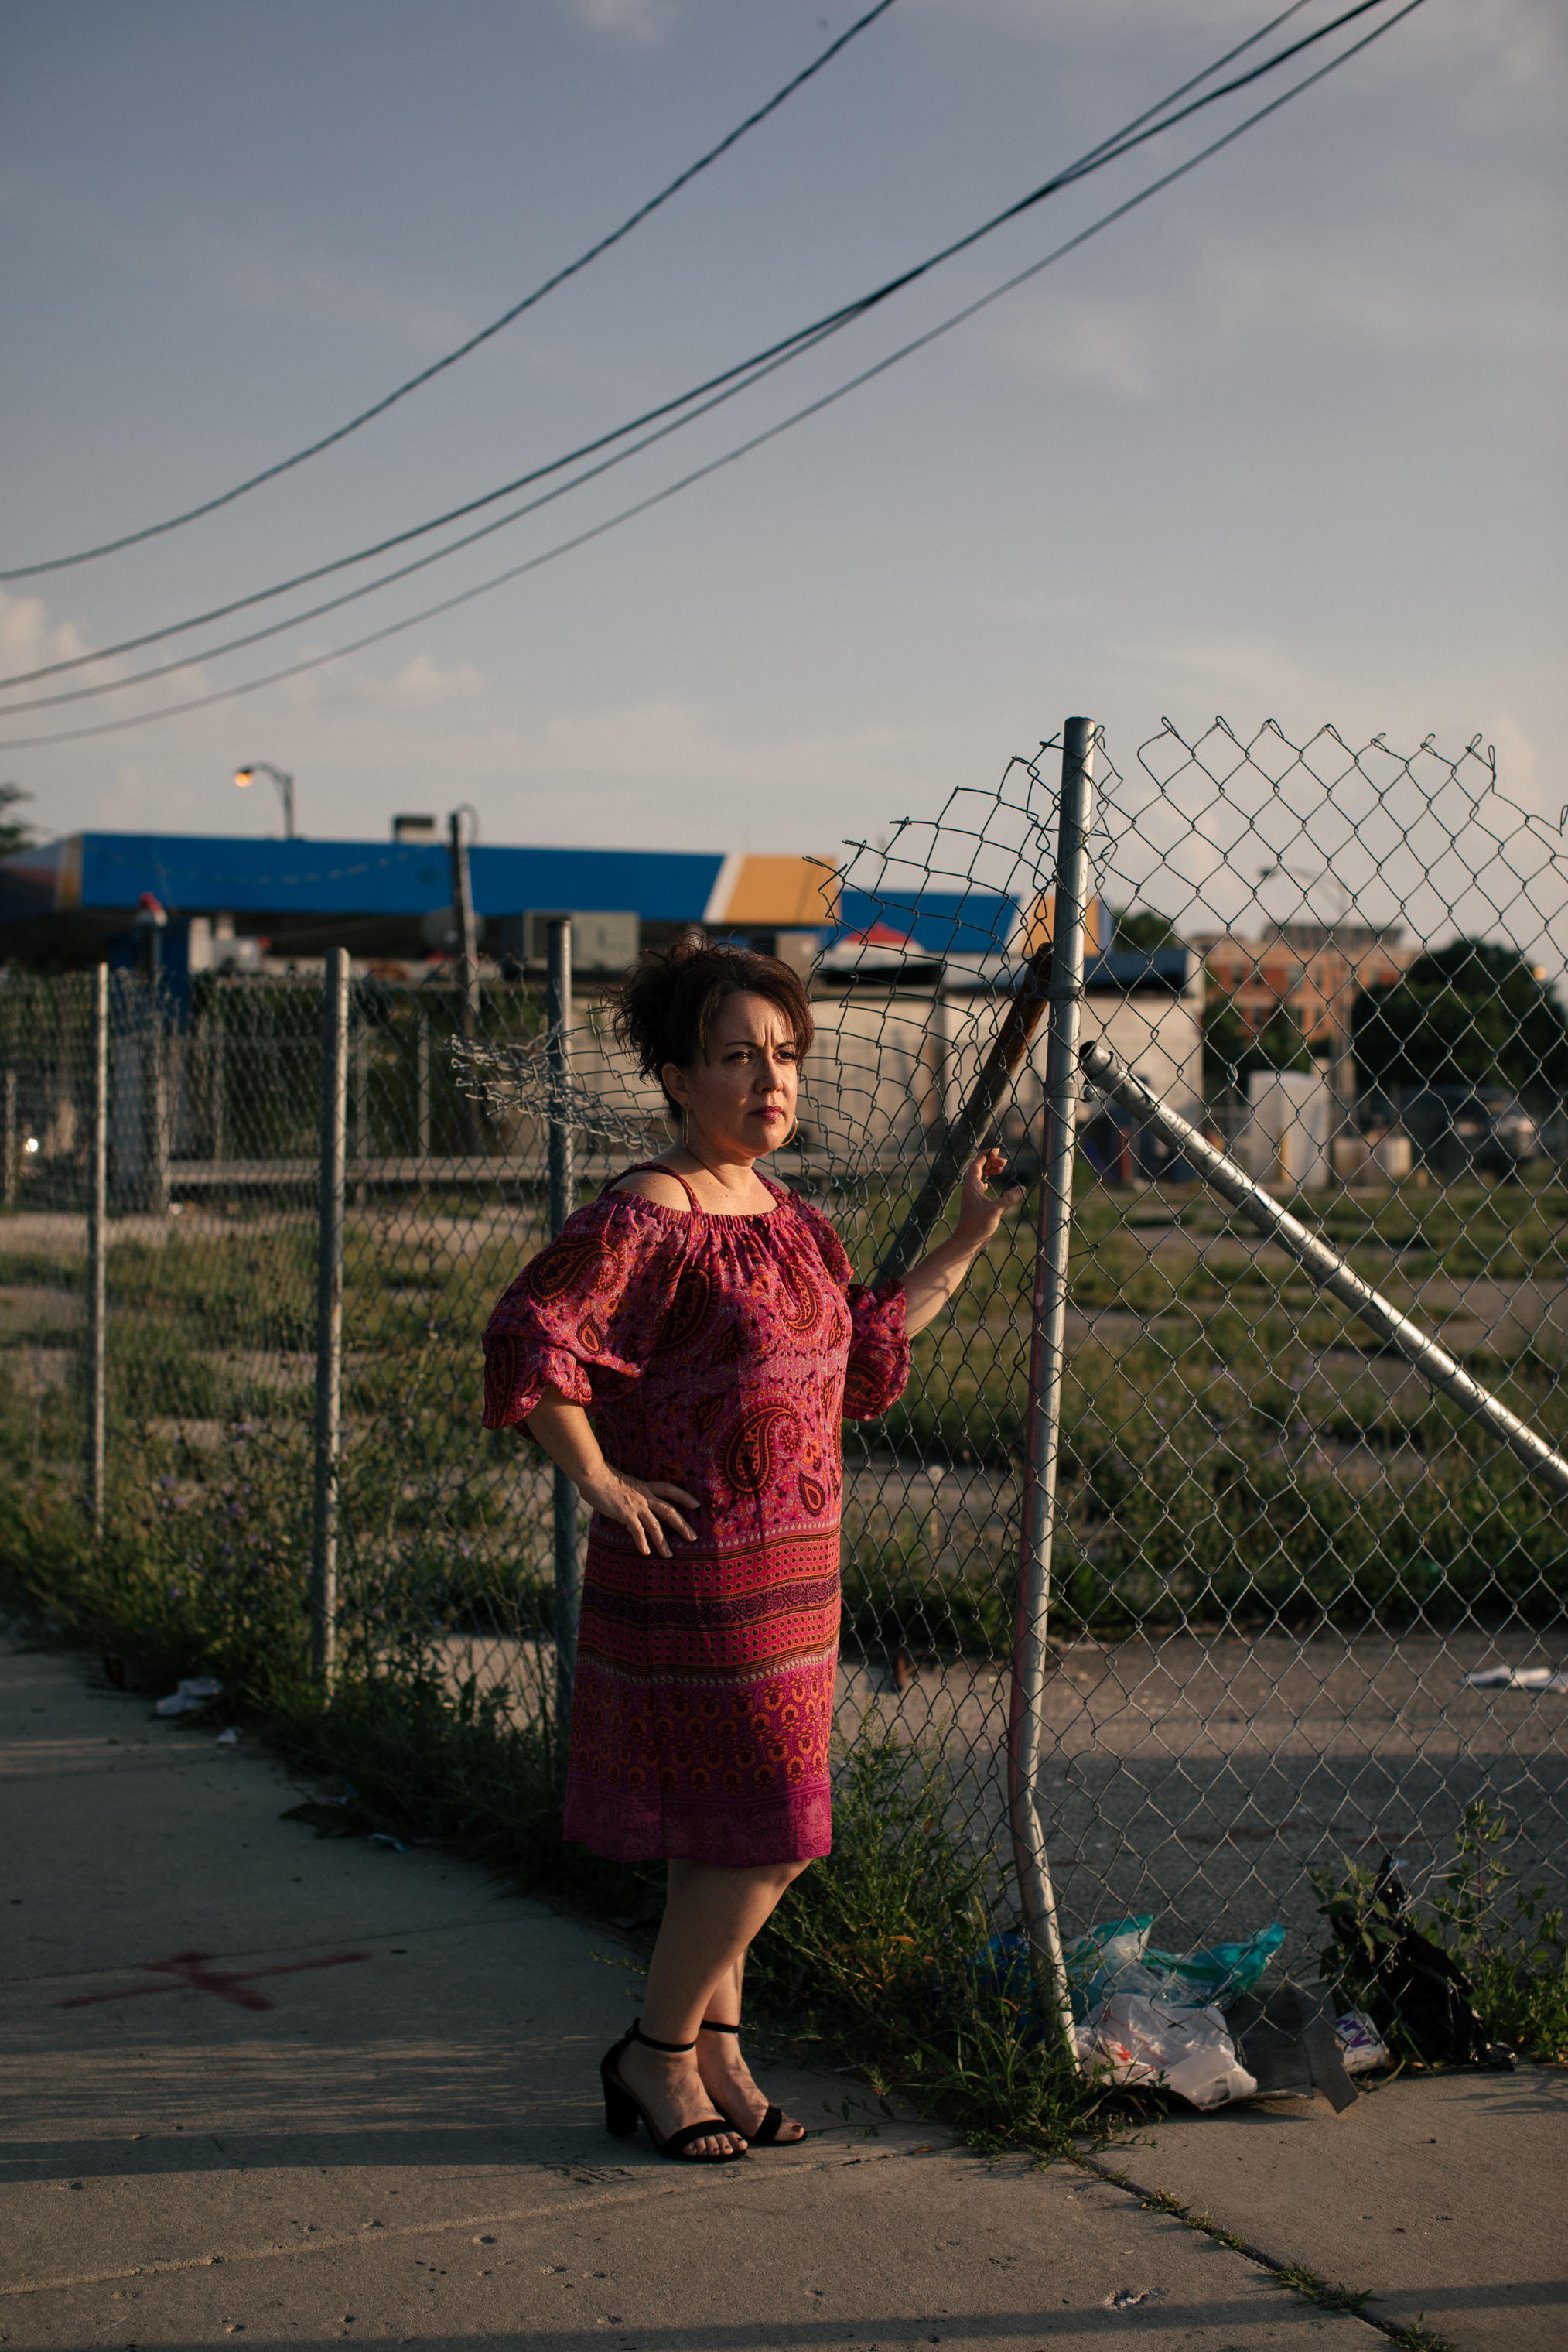 Juanita Irizarry, the Executive Director of Friends of the Parks, poses next to empty lots adjacent to Washington Park on Chicago's South Side. Several lots in the area are empty, and businesses, like the Amstar gas station, could be sold to make way for the Obama Presidential Center. (Alyssa Schukar for TIME)